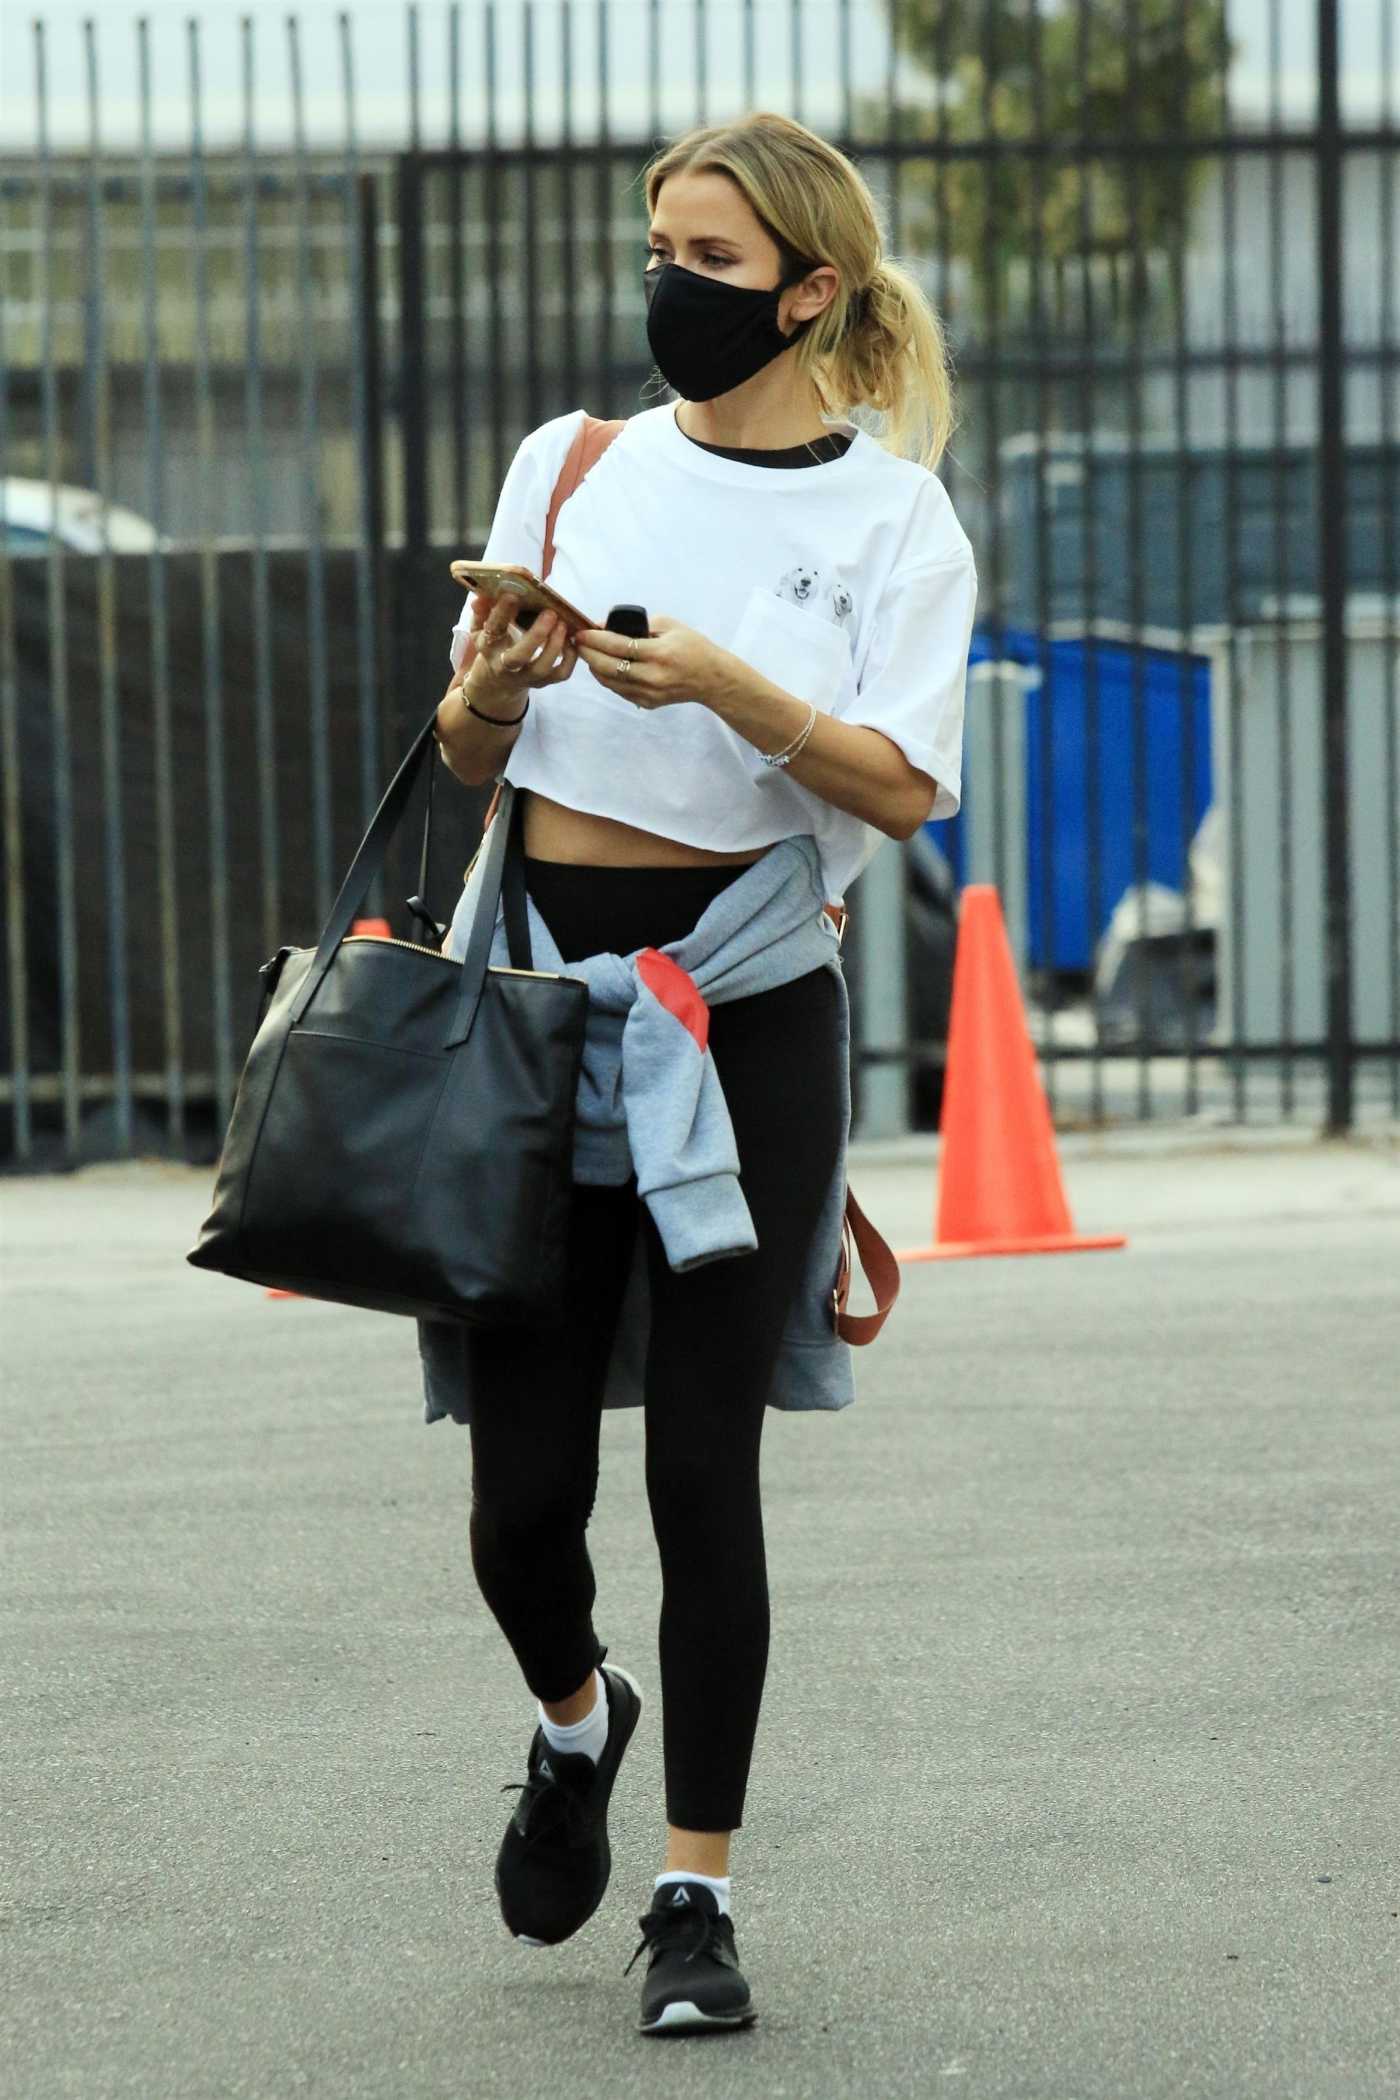 Kaitlyn Bristowe in a White Cropped T-Shirt Arrives at the DWTS Studio in Los Angeles 10/23/2020